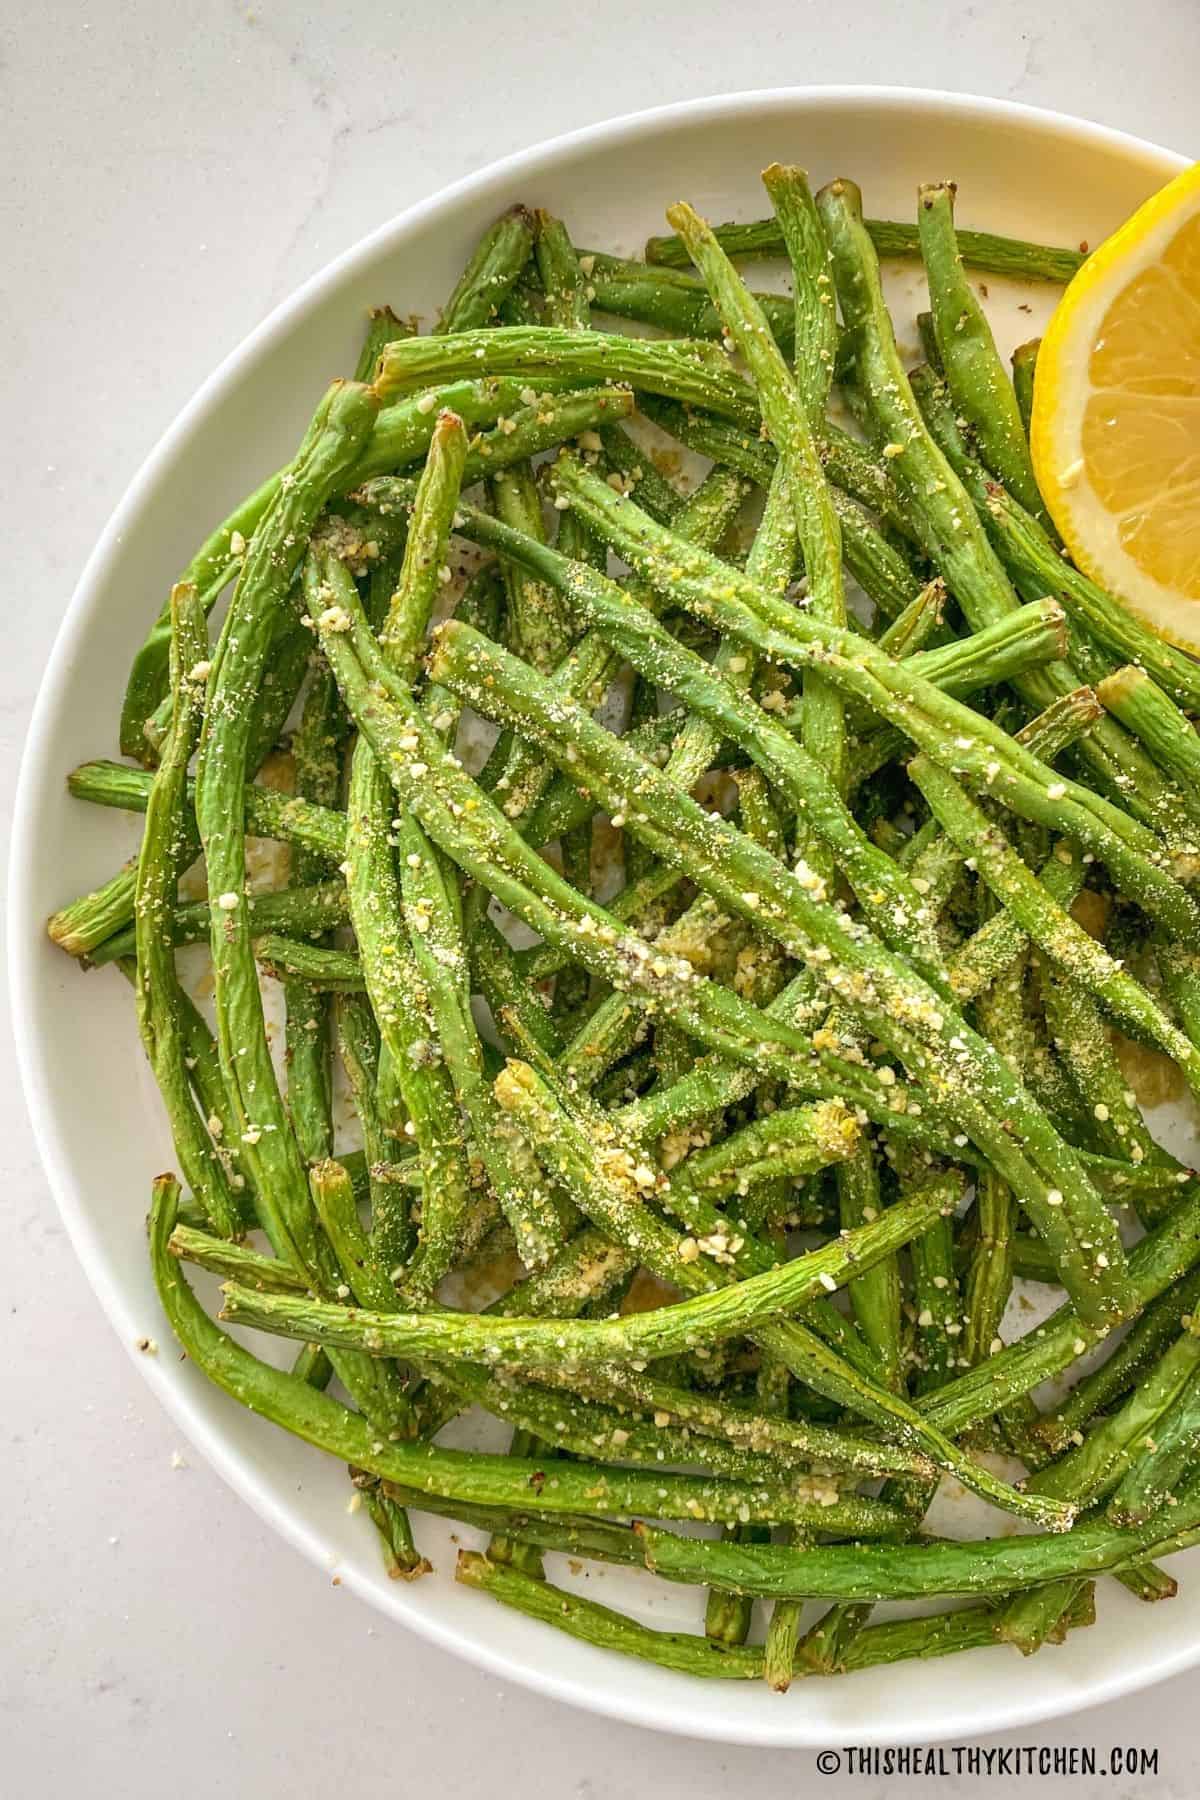 Plate of green beans with vegan parmesan cheese sprinkled on top.